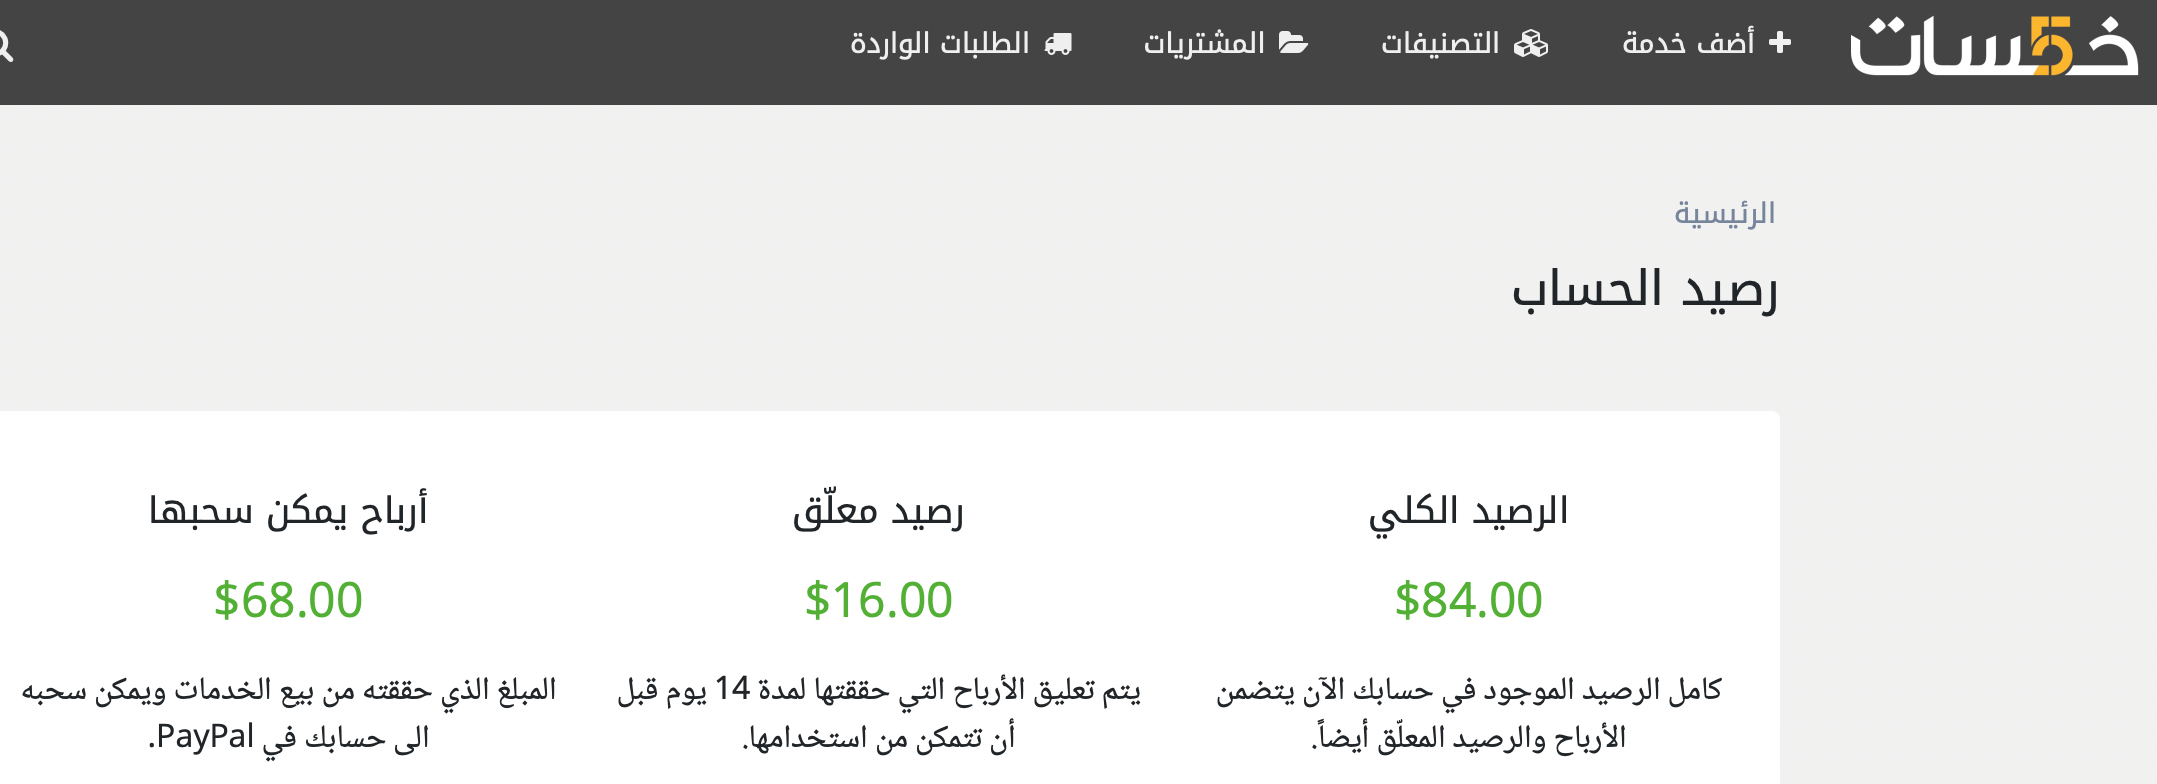 Proof of income from Khamsat website